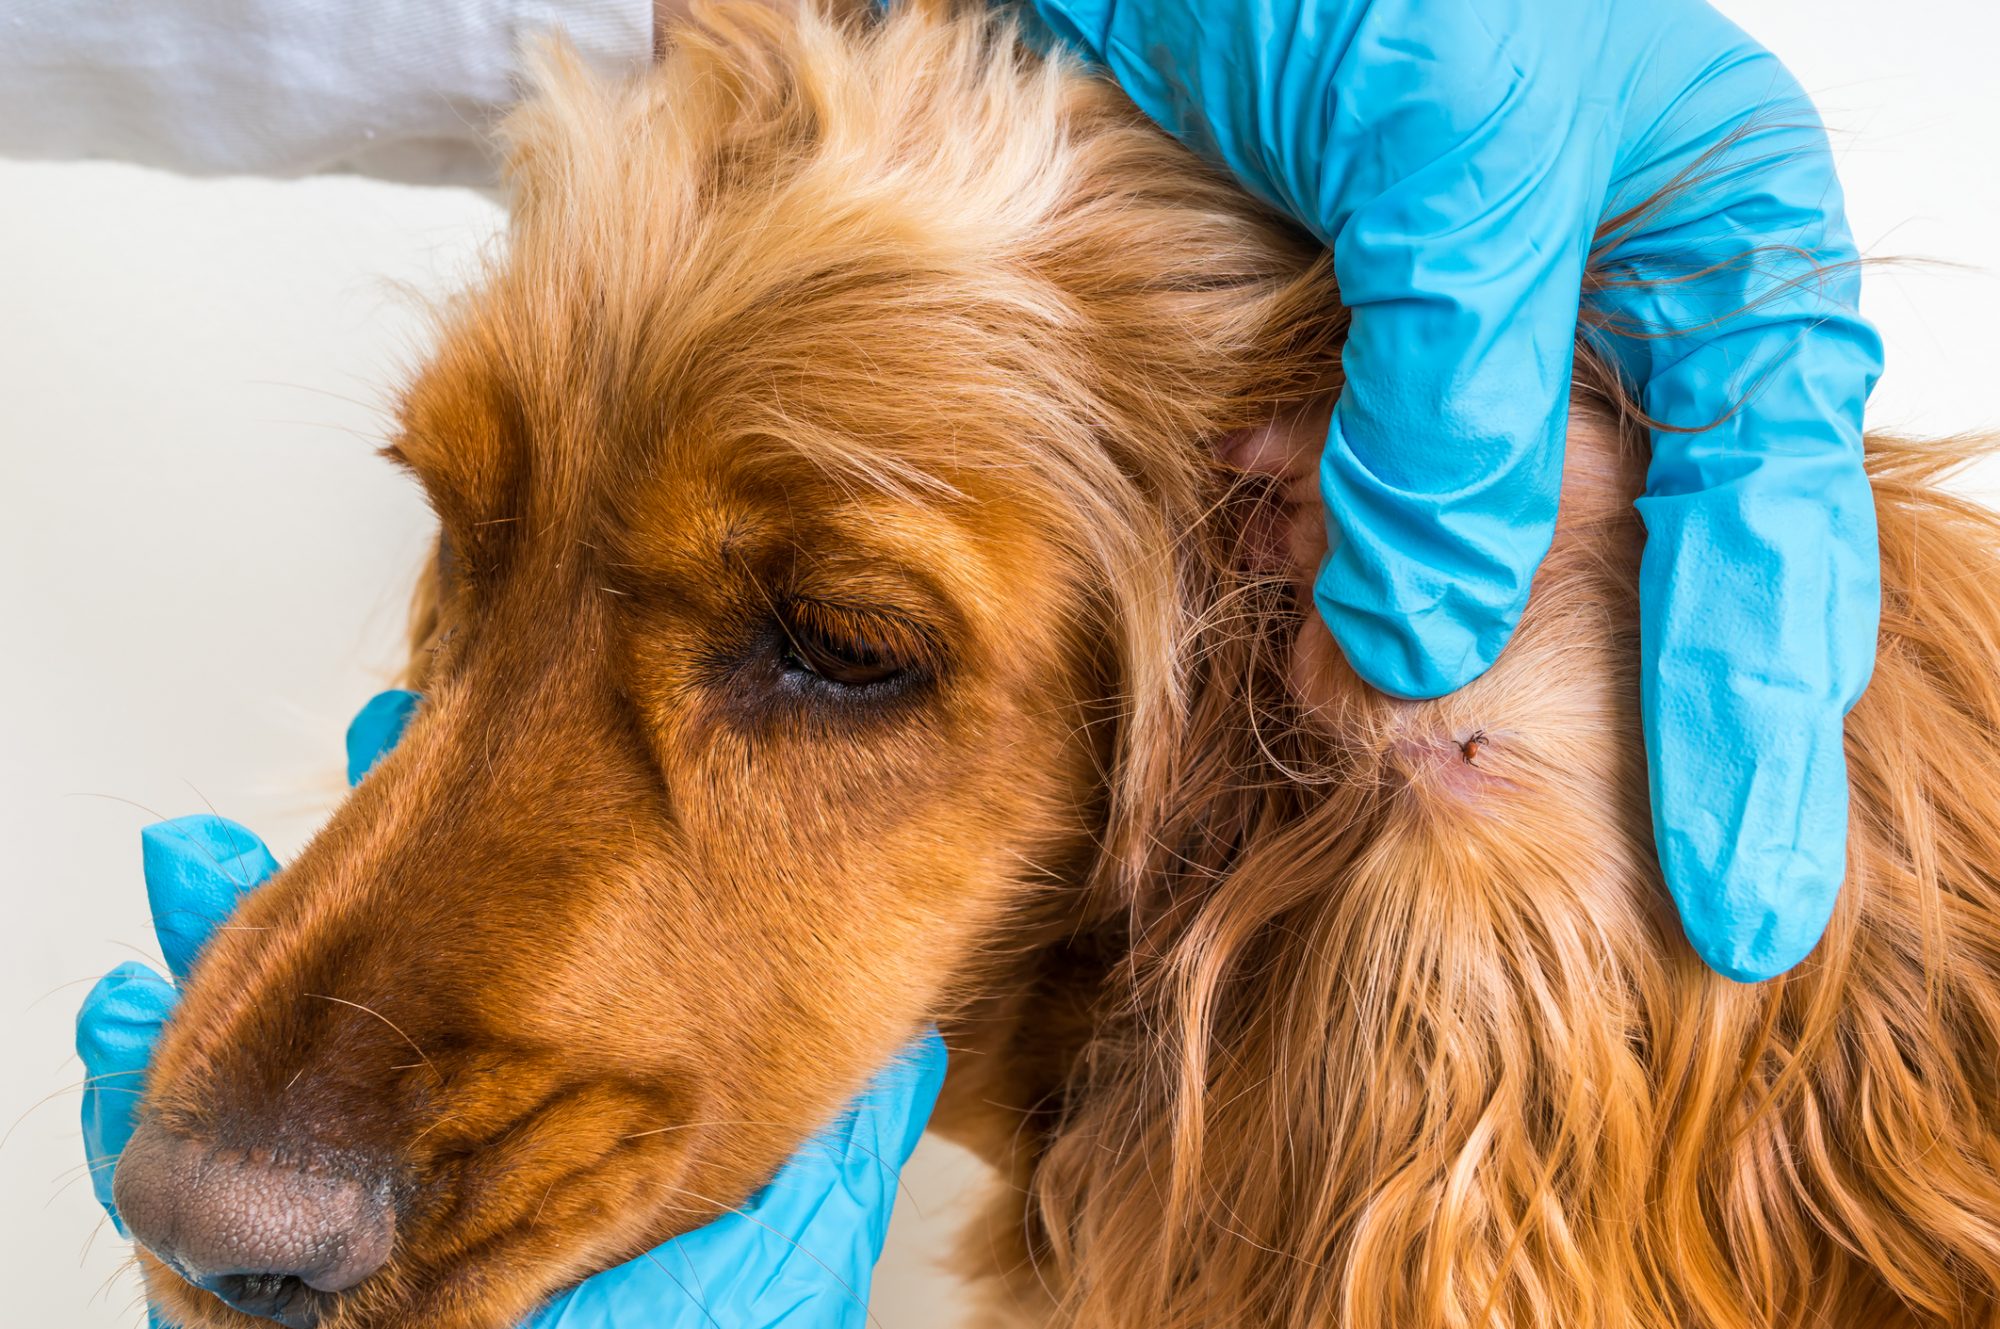 Veterinarian removing a tick from Cocker Spaniel dog